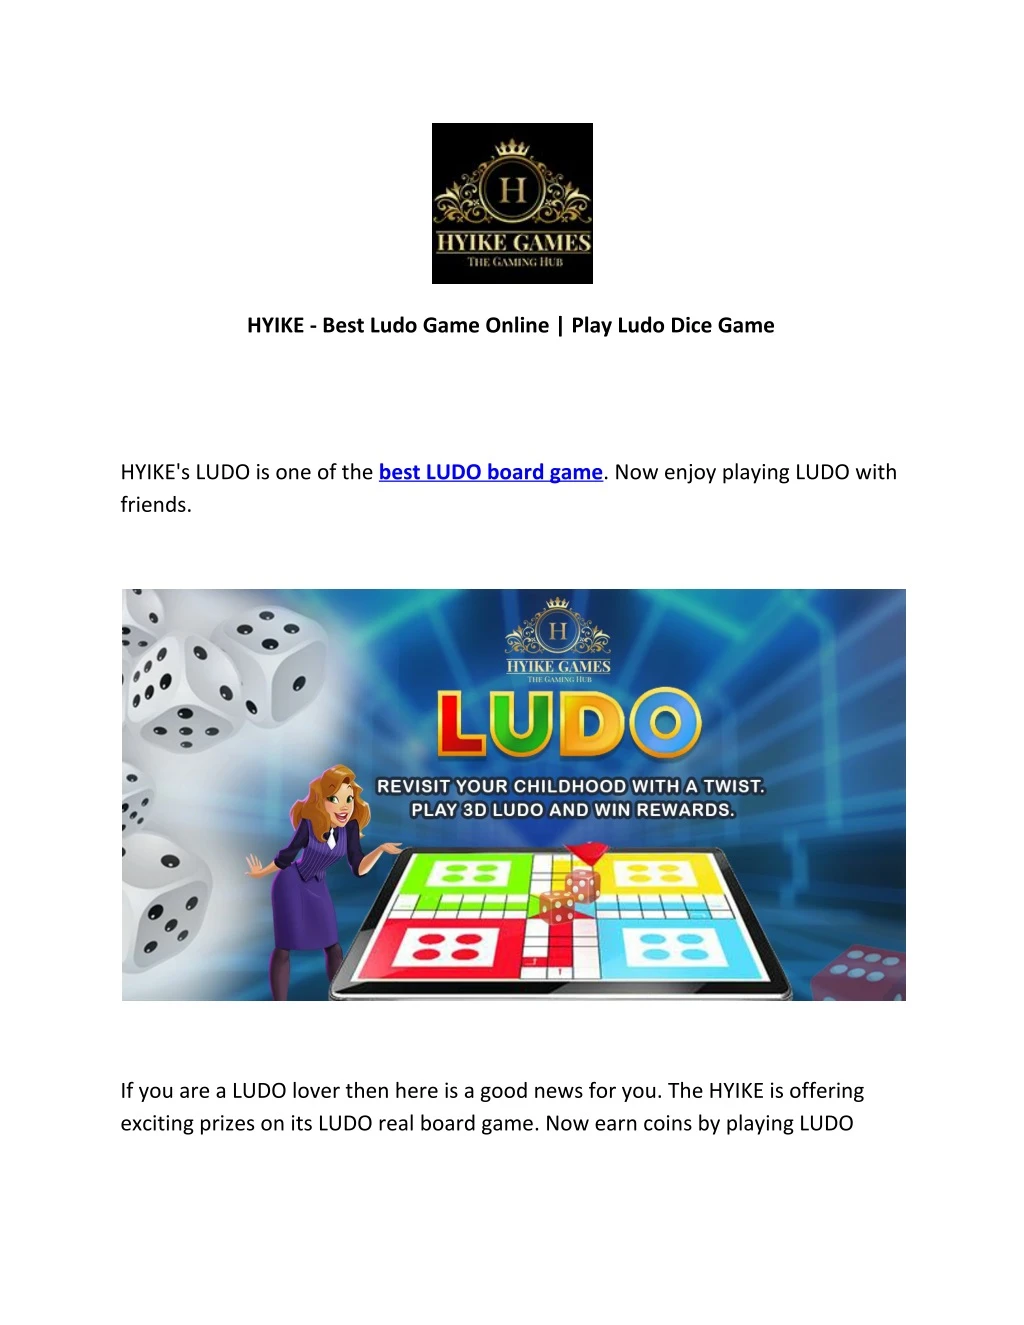 hyike best ludo game online play ludo dice game